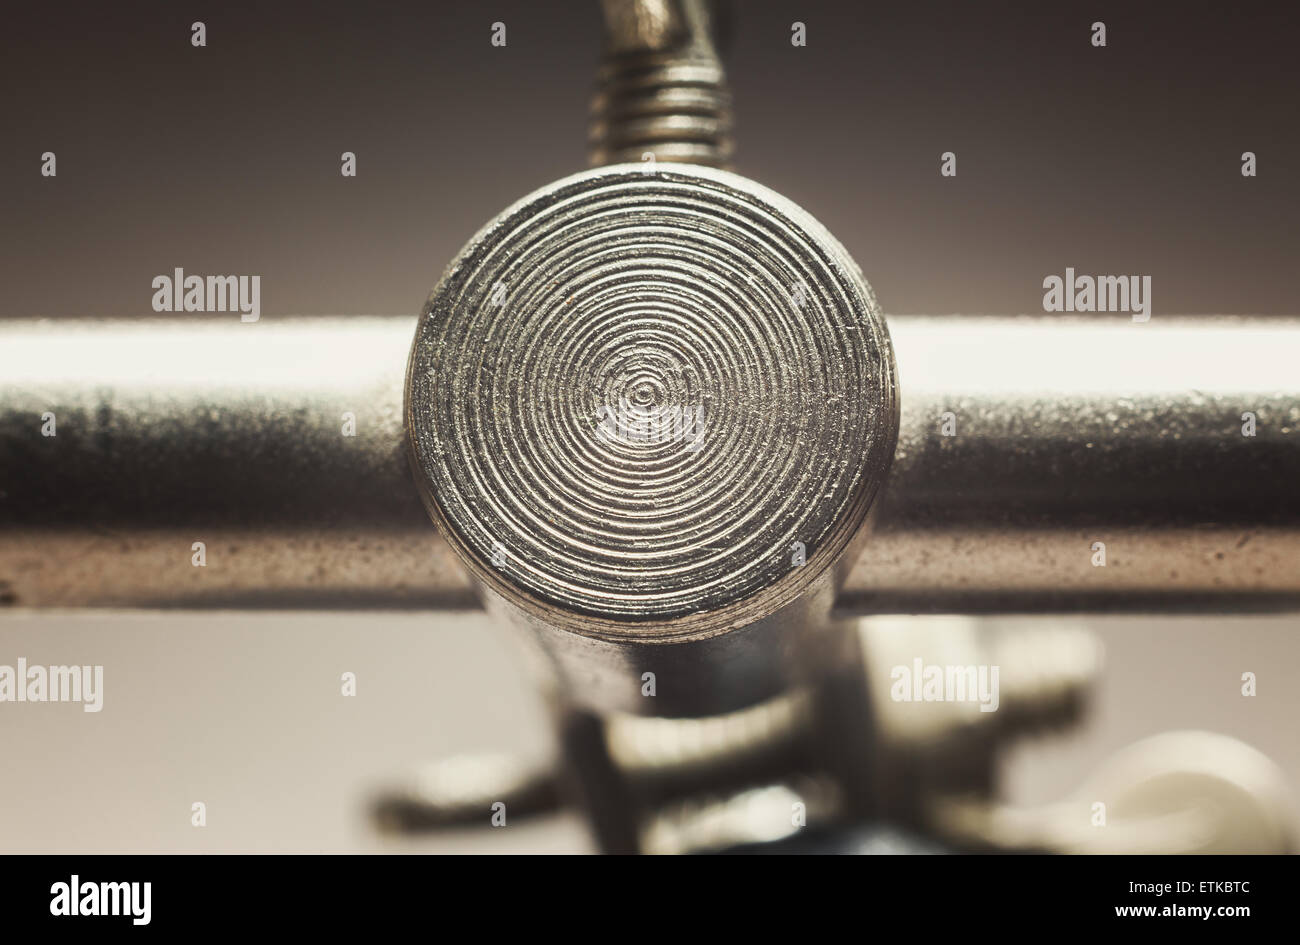 Abstract composition, part of an old tool, texture details. Stock Photo